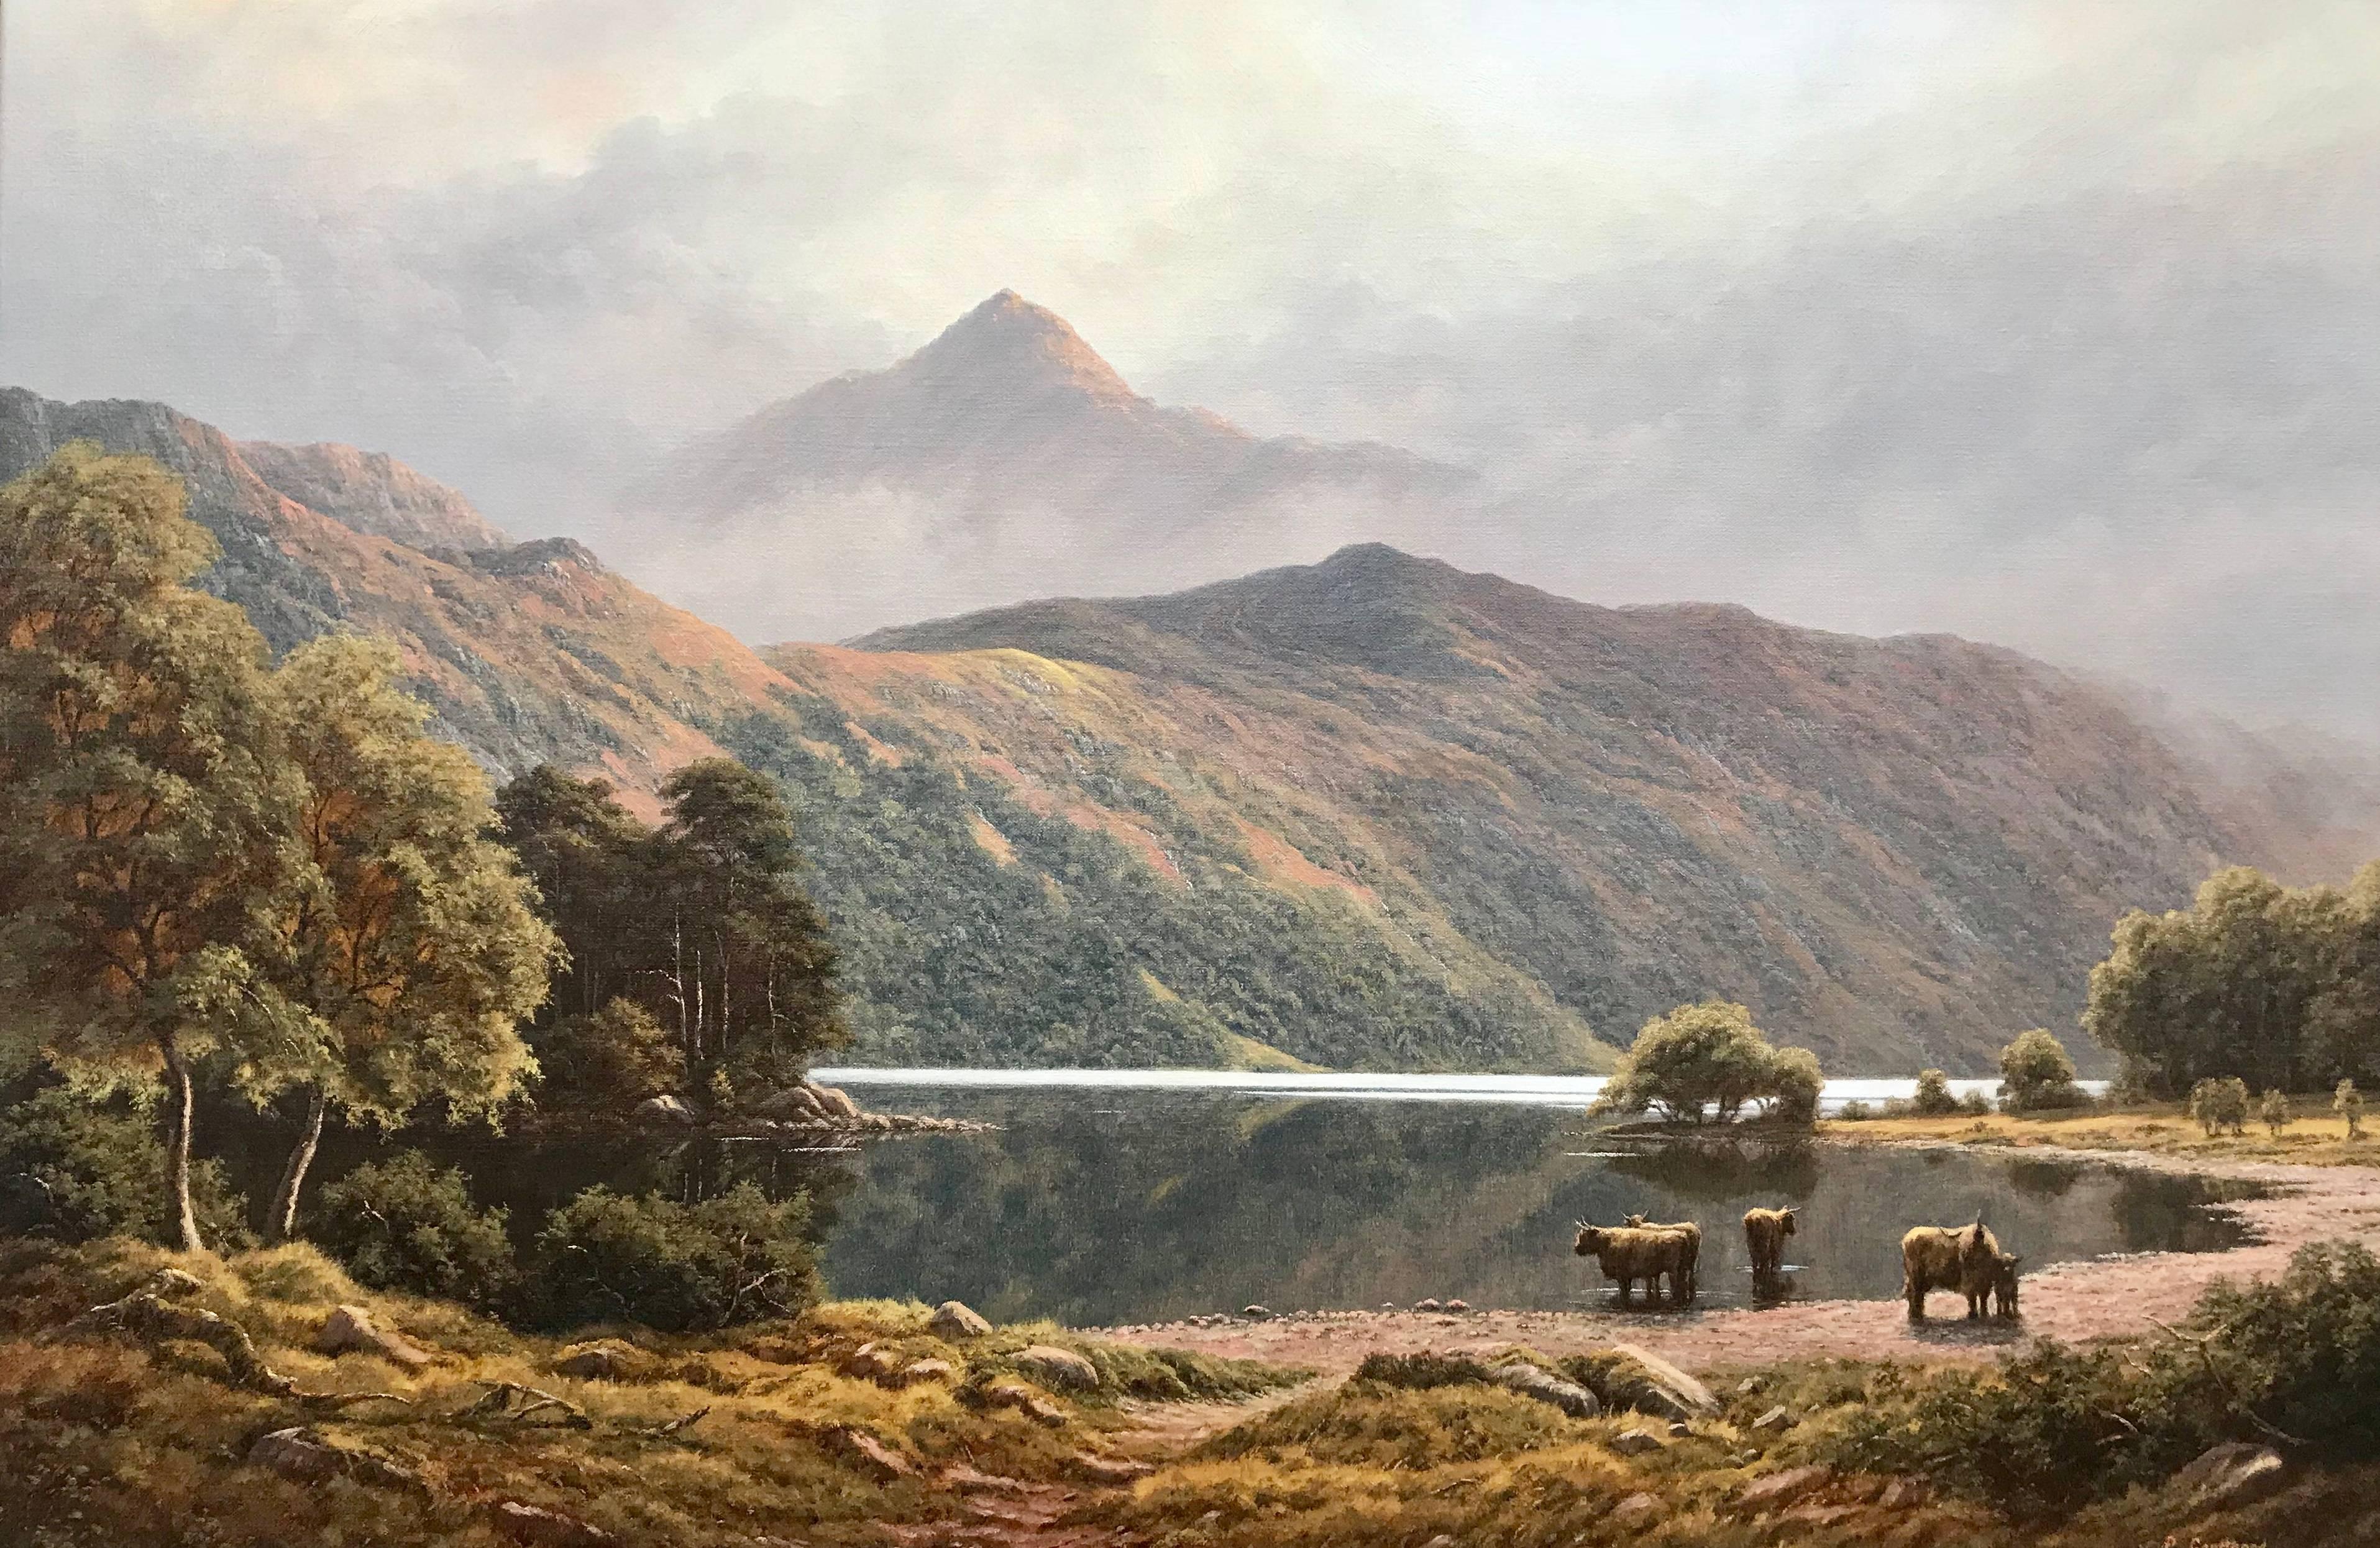 A large original painting by Peter Coulthard of Ben Lomond in Scotland with Highland Cows by the water's edge at Loch Lomond. This is largest known painting from Peter Coulthard on the market. 

Art measures 36 x 24 inches
Frame measures 44 x 32